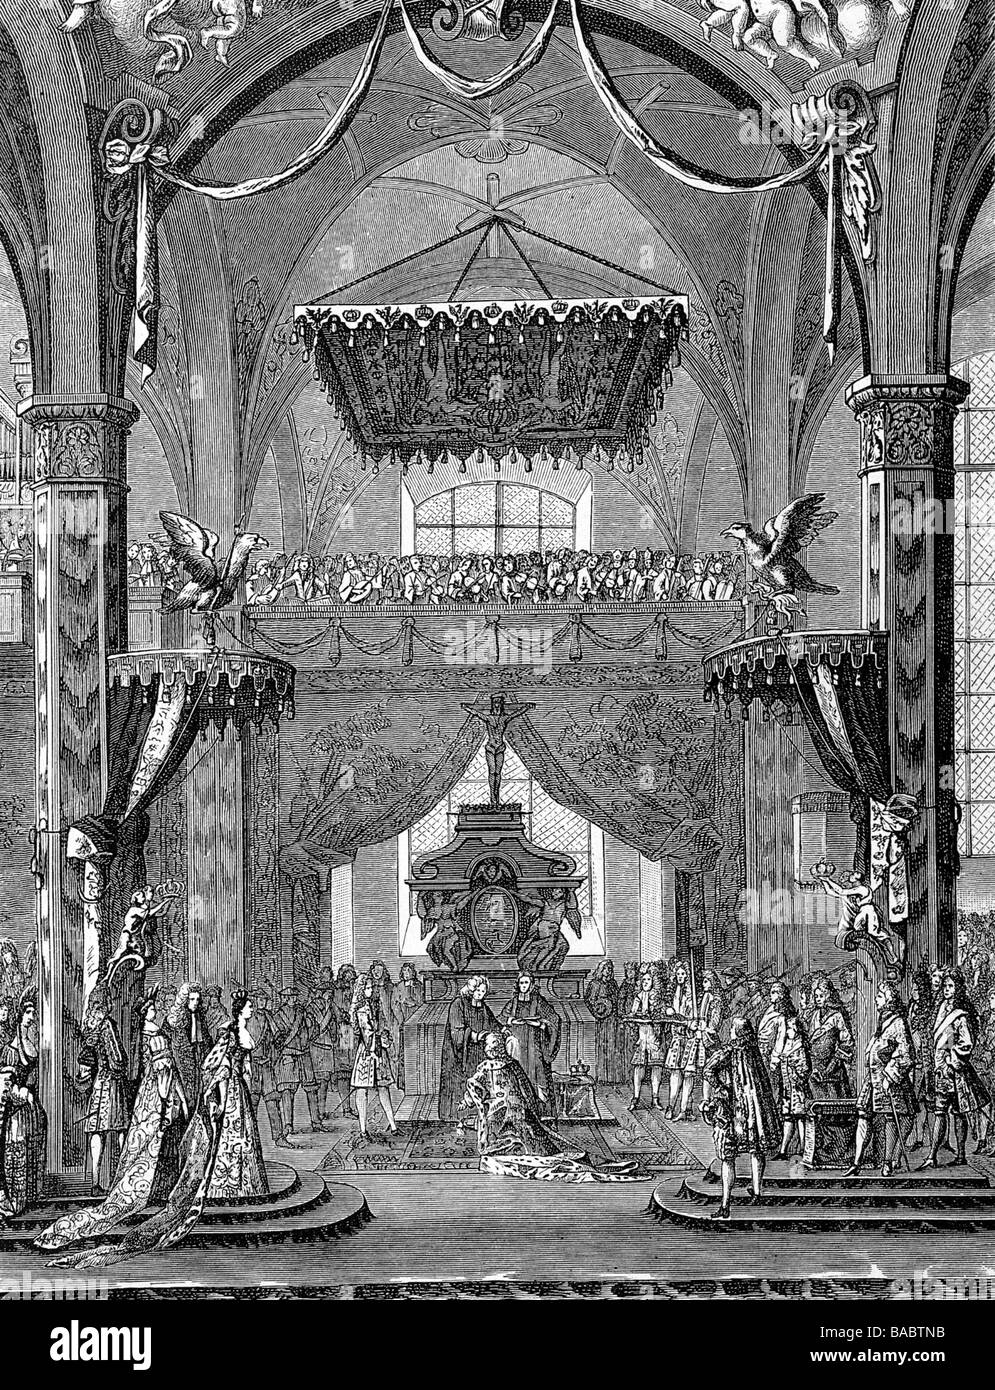 Frederick I, 11.7.1657 - 25.2.1713, King in Prussia 18.1.1701- 25.2.1713, coronation in Koenigsberg, 18.1.1701, copper engraving from 'Theatrum Europaeum' by Matthaeus Merian, Artist's Copyright has not to be cleared Stock Photo